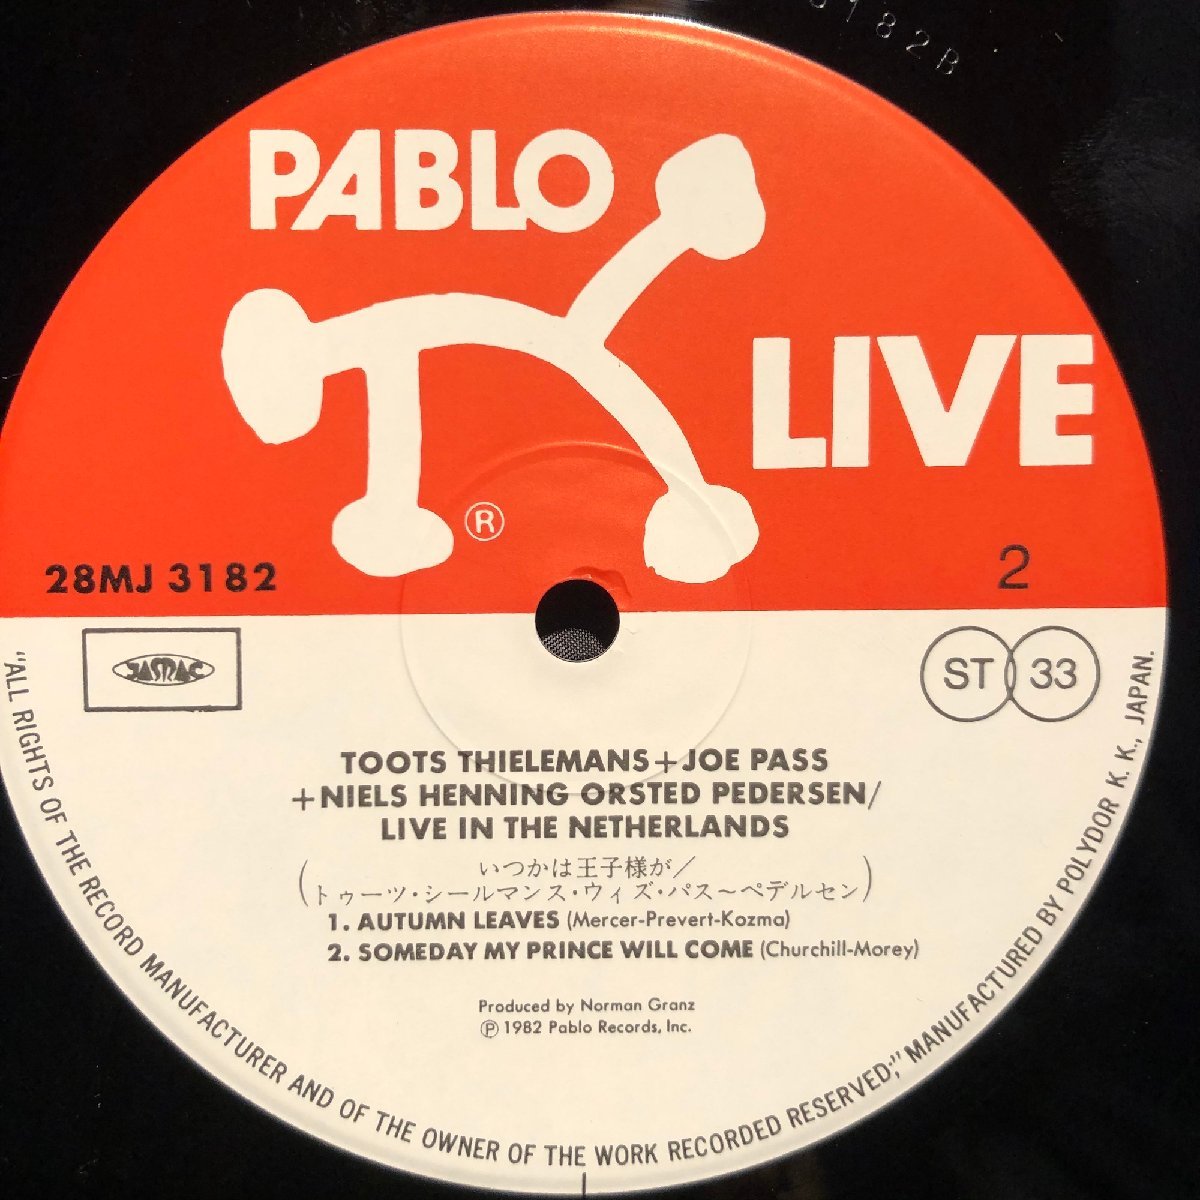 Toots Thielemans + Joe Pass + Niels-Henning Orsted Pedersen / Live In The Netherlands LP Pablo Live・POLYDOR_画像5